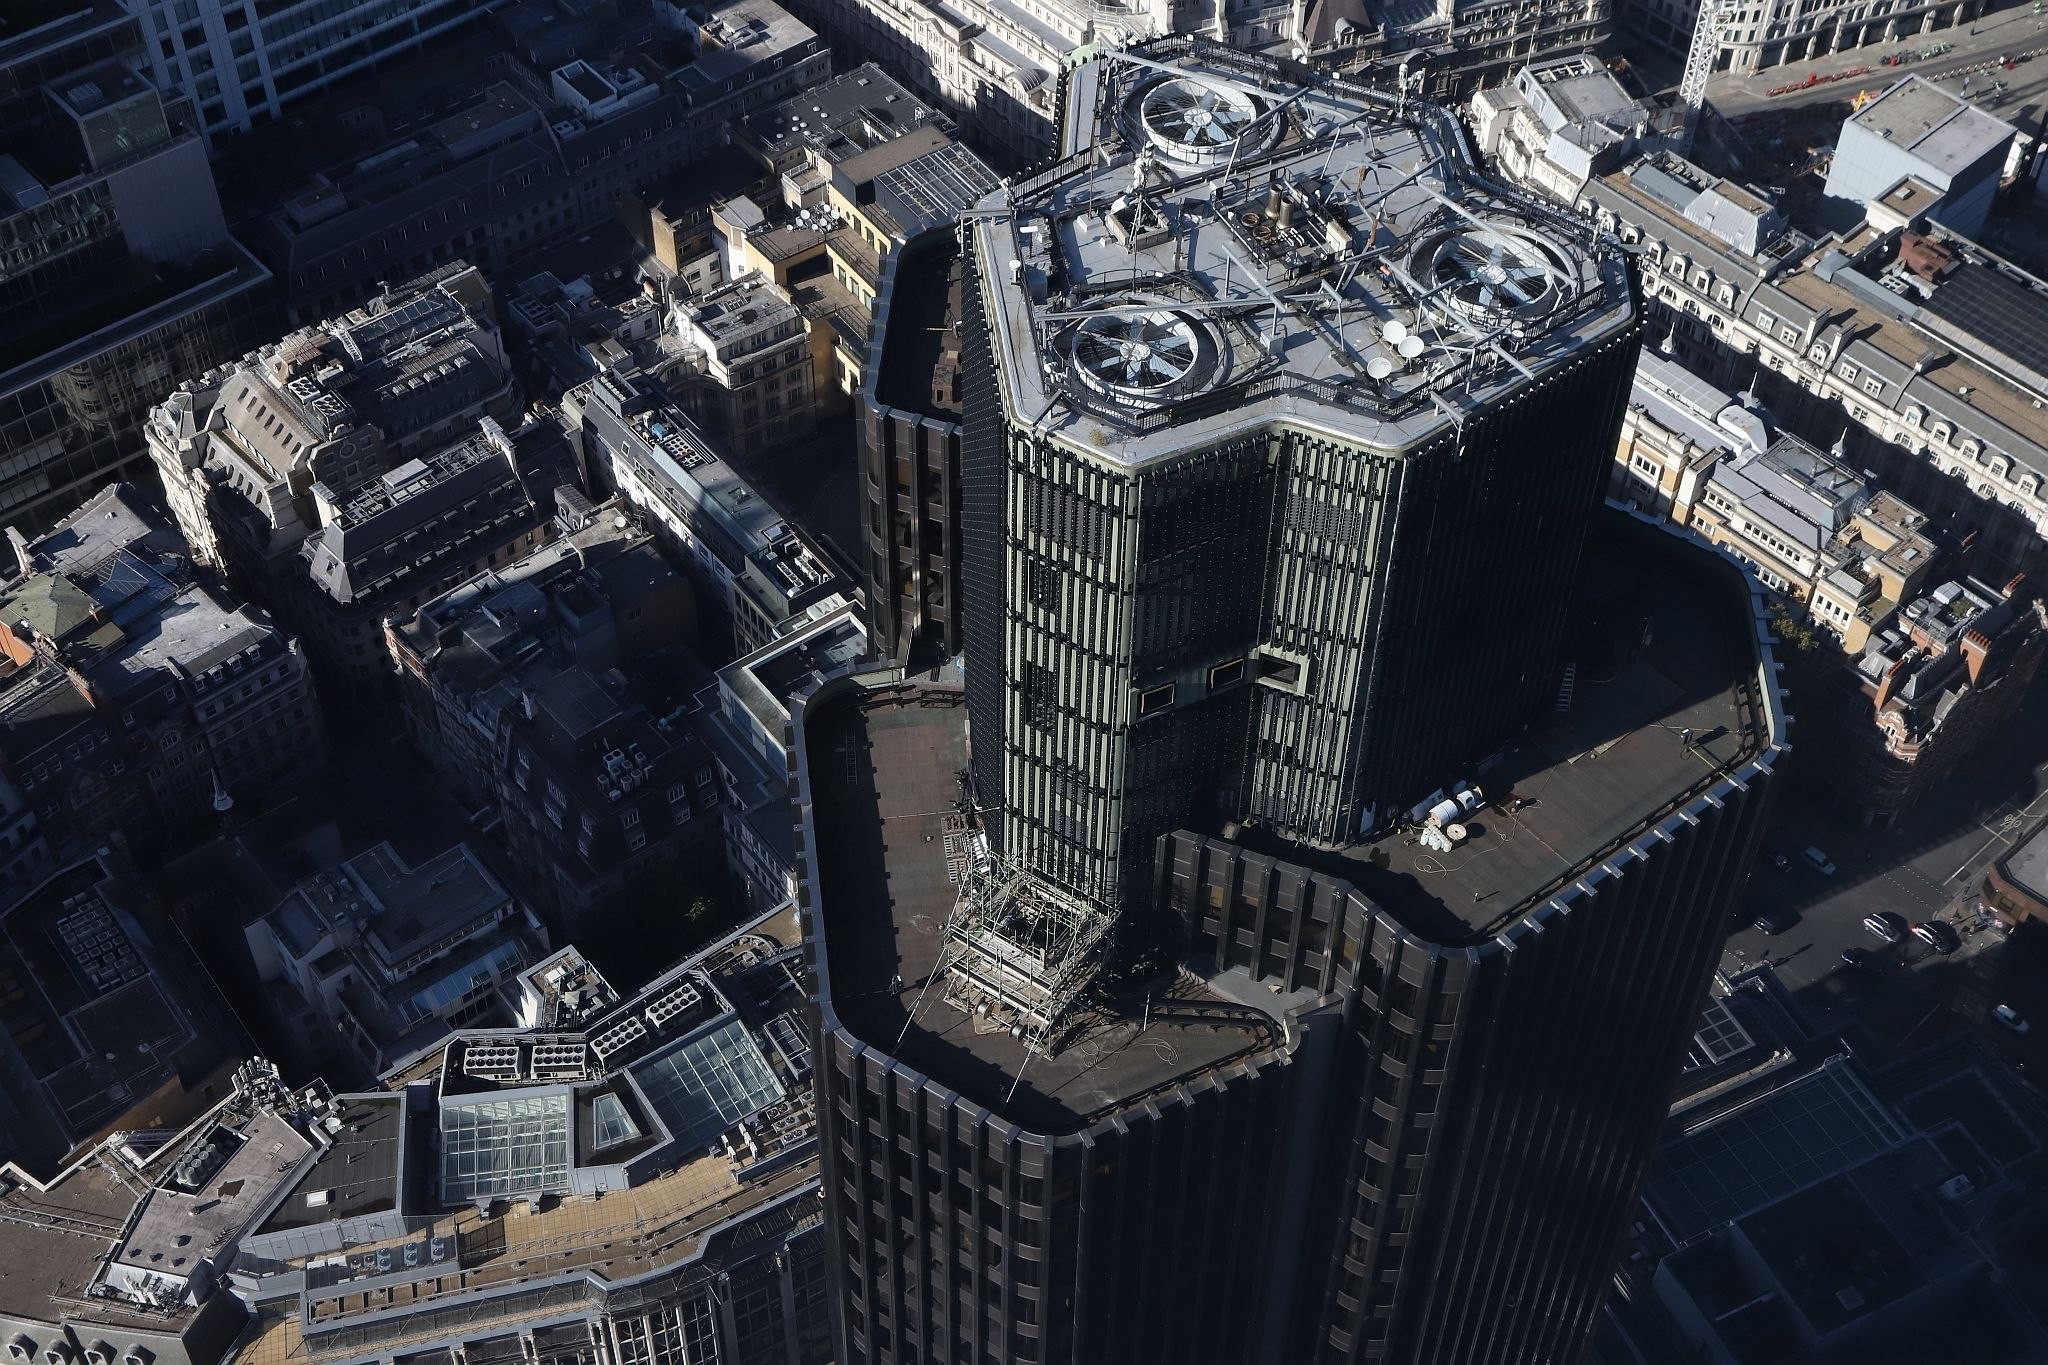 Aerial view of Tower 42 (NatWest Tower), London. View from the Horizon observation platform on the 58th floor of 22 Bishopsgate in the City of London. Photo taken on 15-Oct-2023.